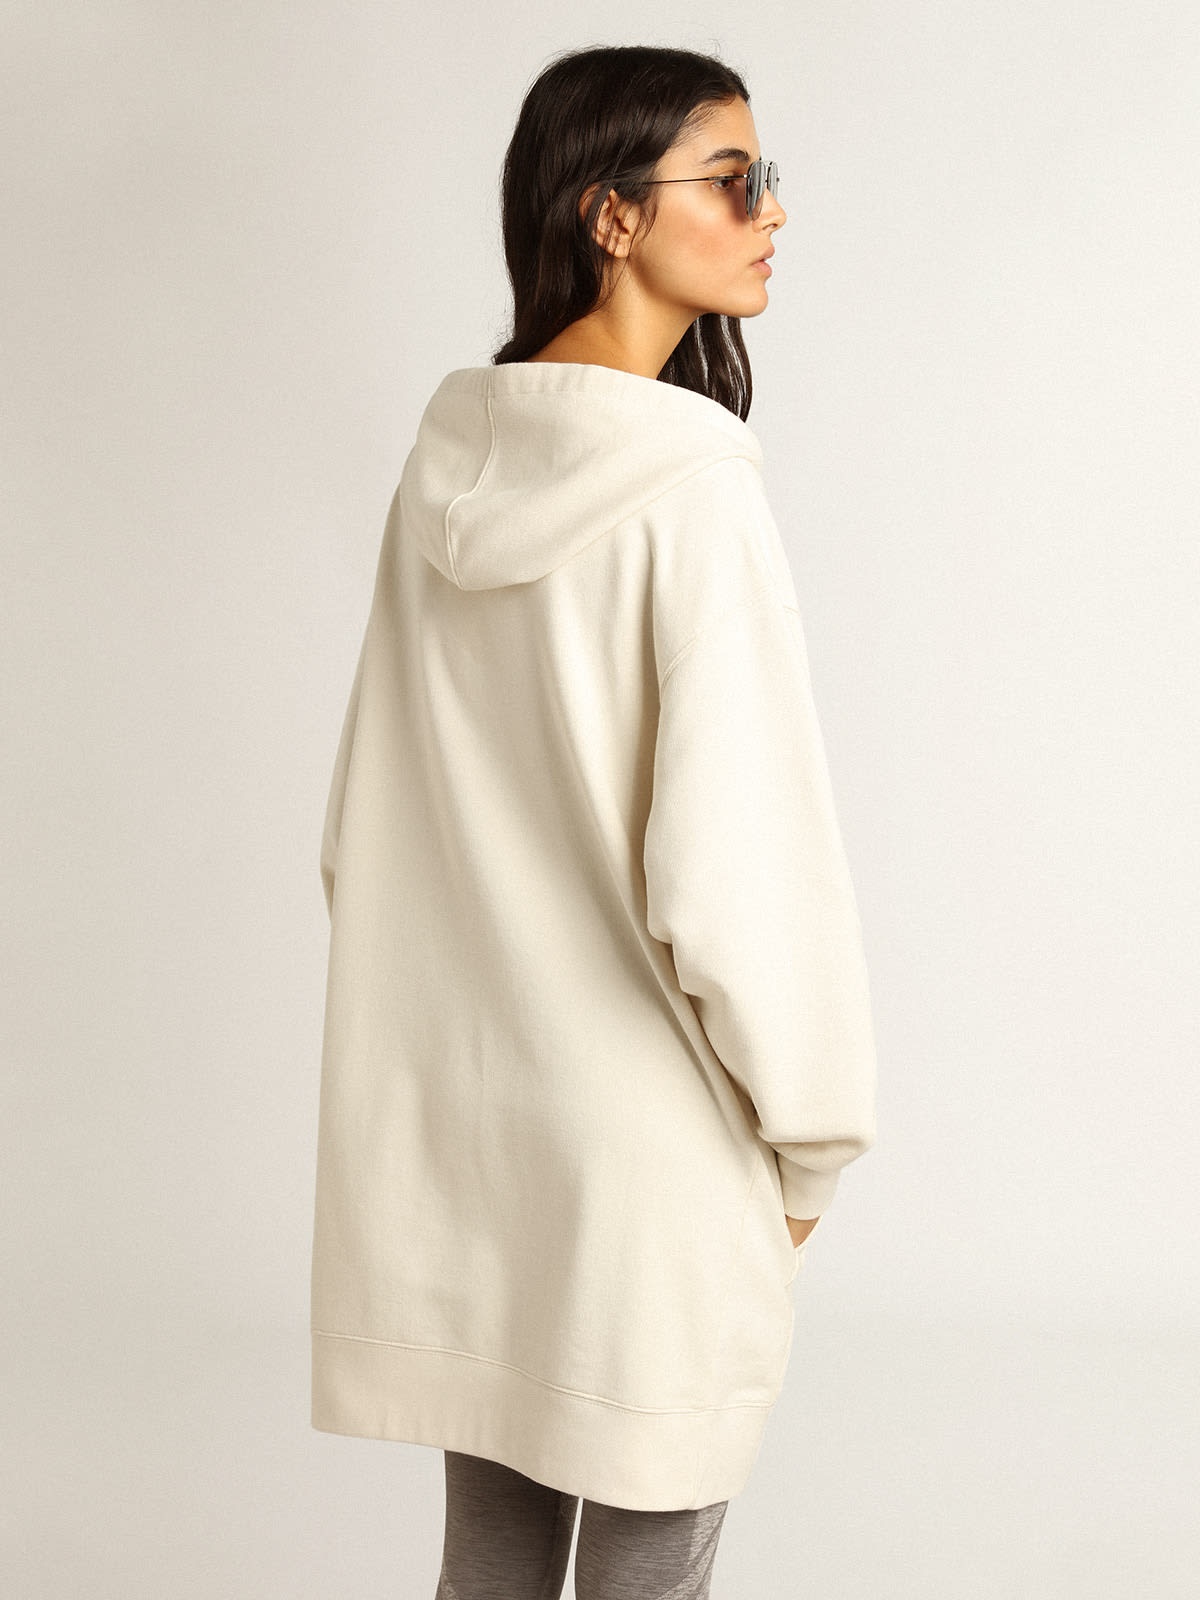 White sweatshirt dress with hood and Golden patch - 5